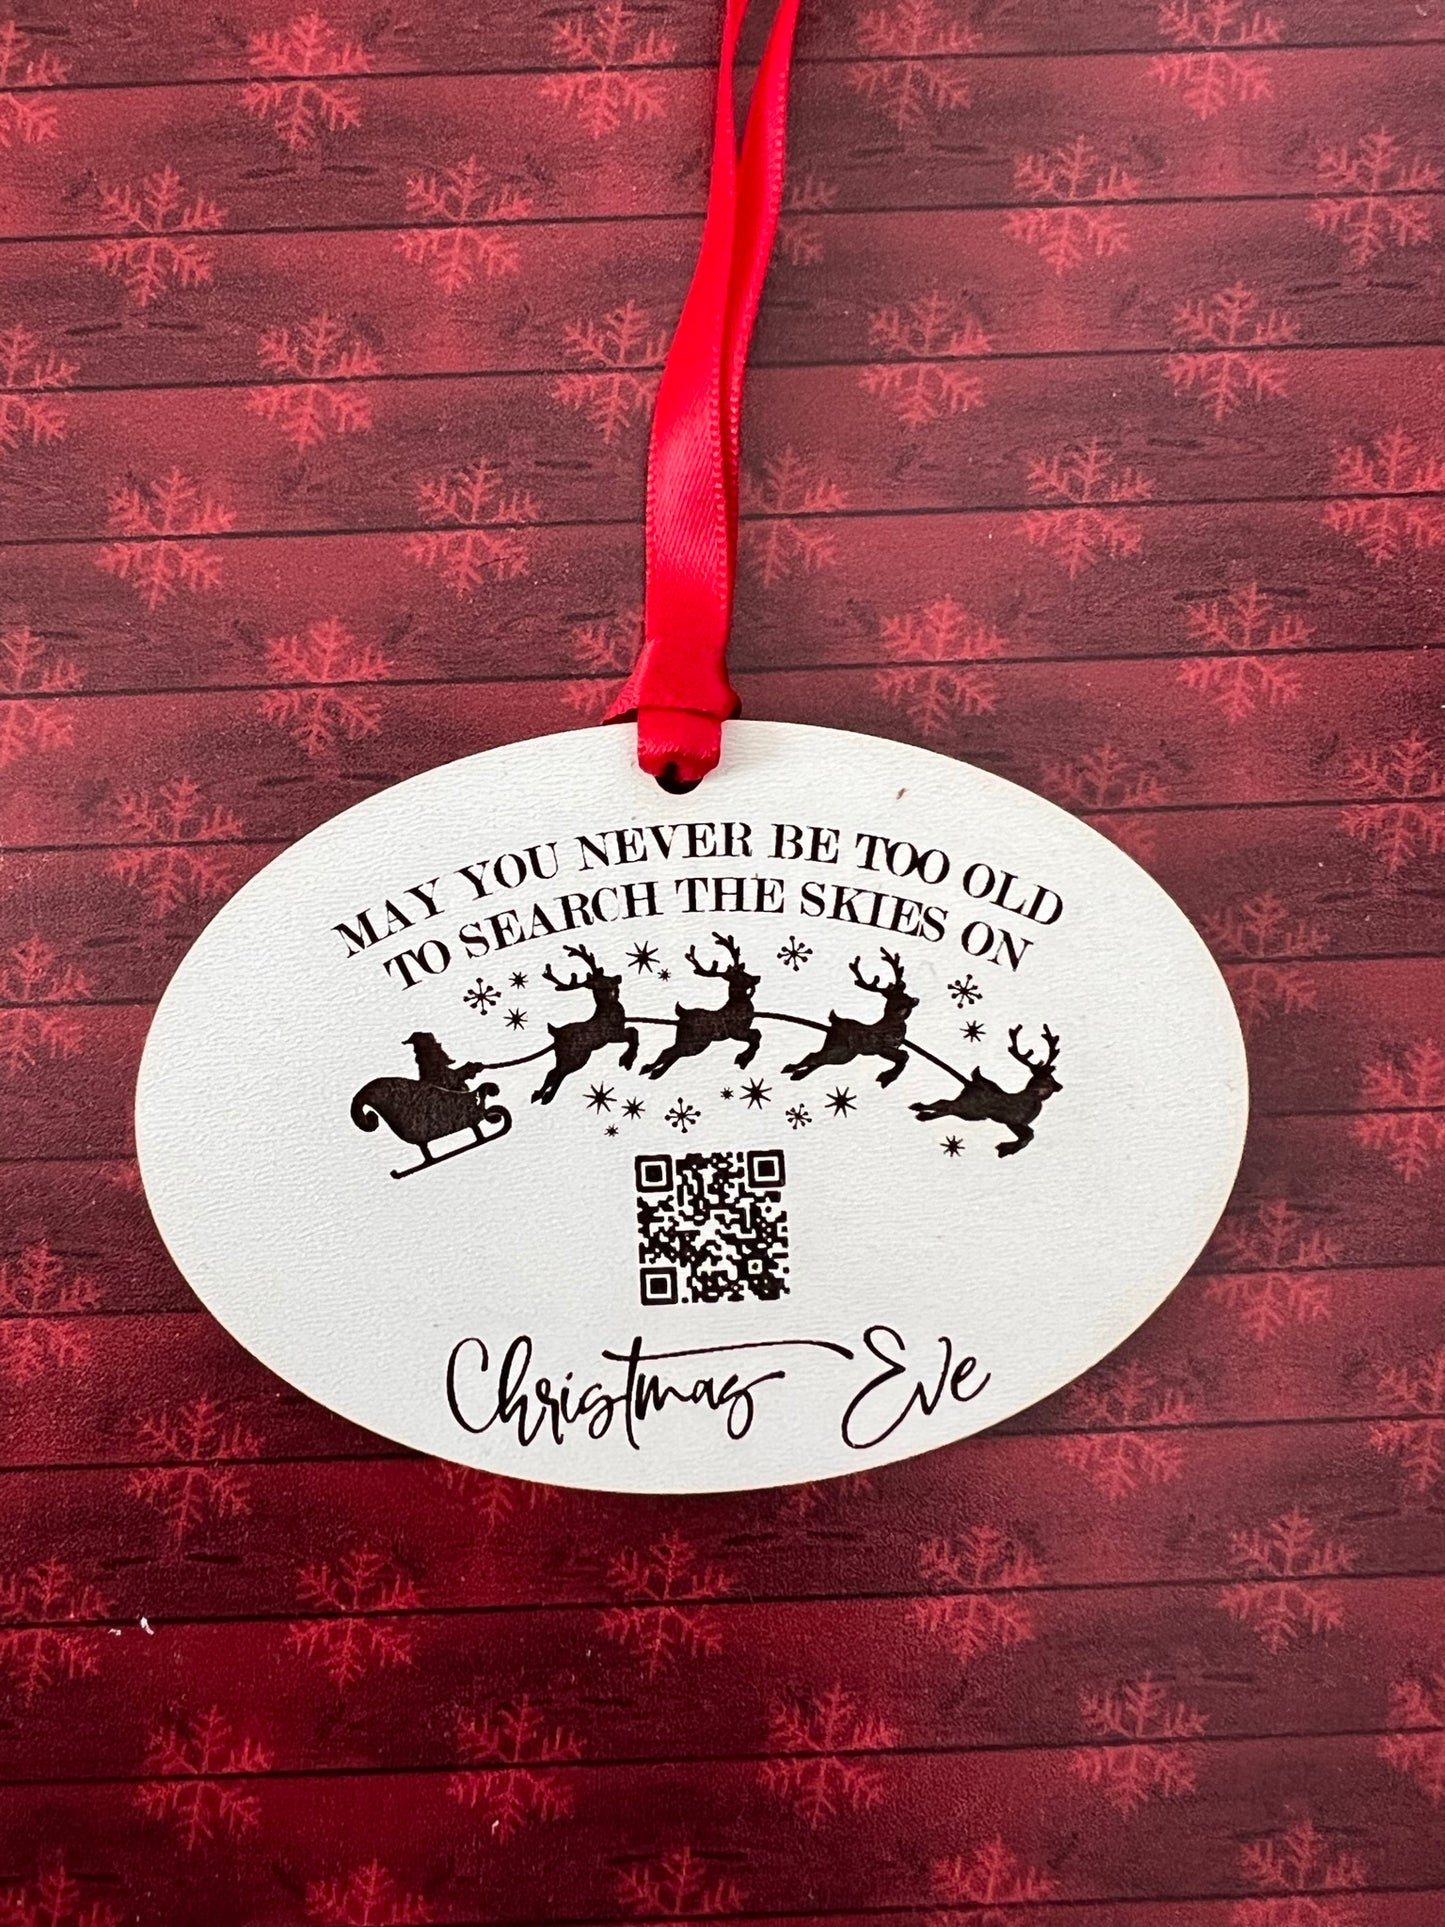 May You Never Be Too Old To Search The Skies On Christmas Eve Ornament w/QR Code